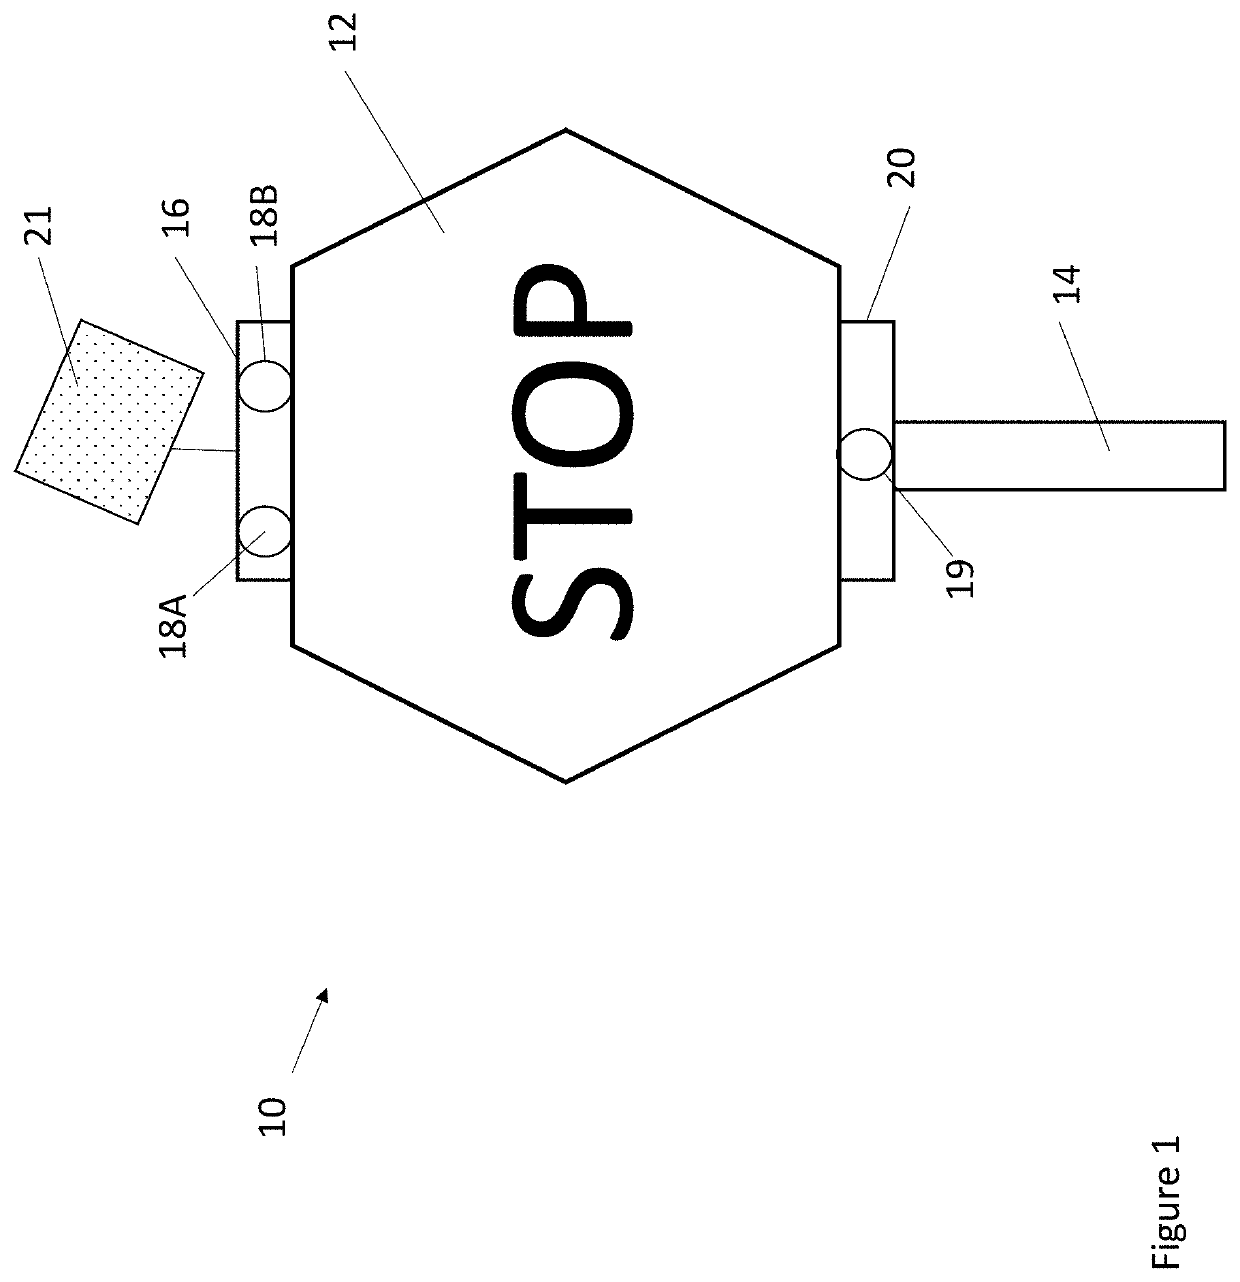 Stop sign with traffic control features